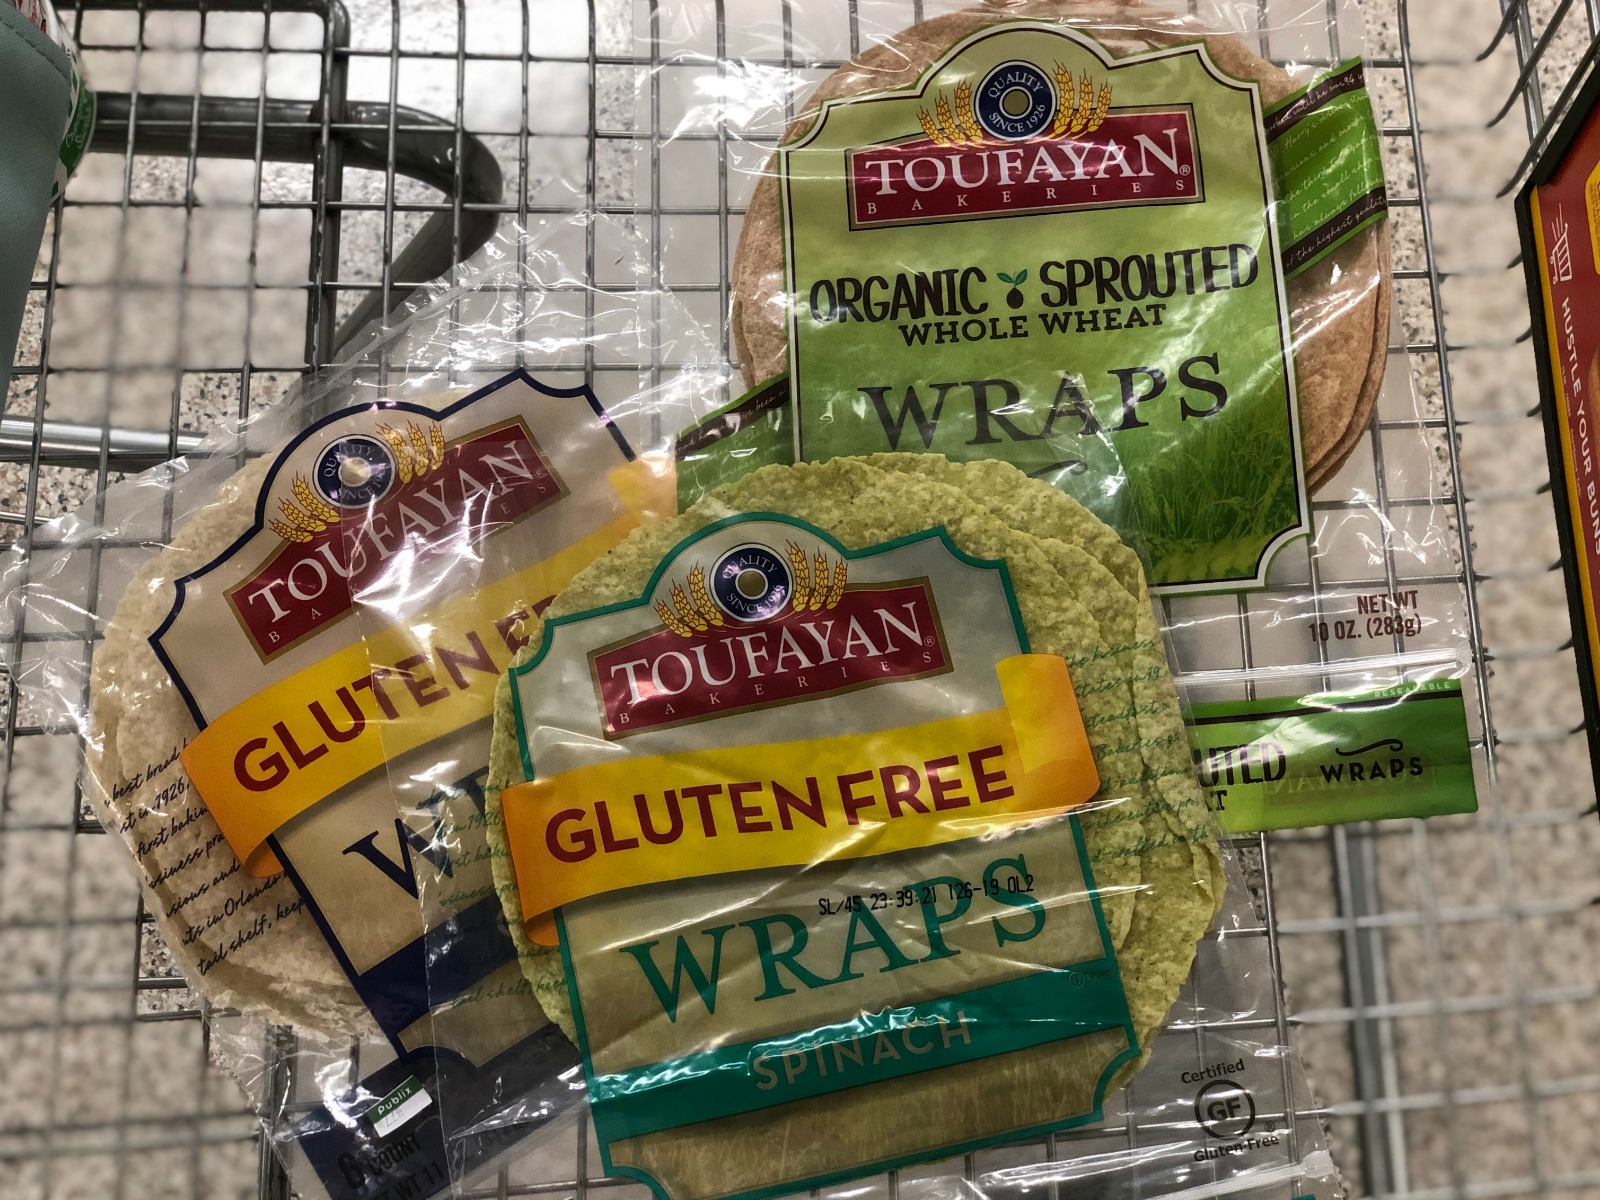 Stock Up On Toufayan Wraps –  BOGO Sale This Week At Publix